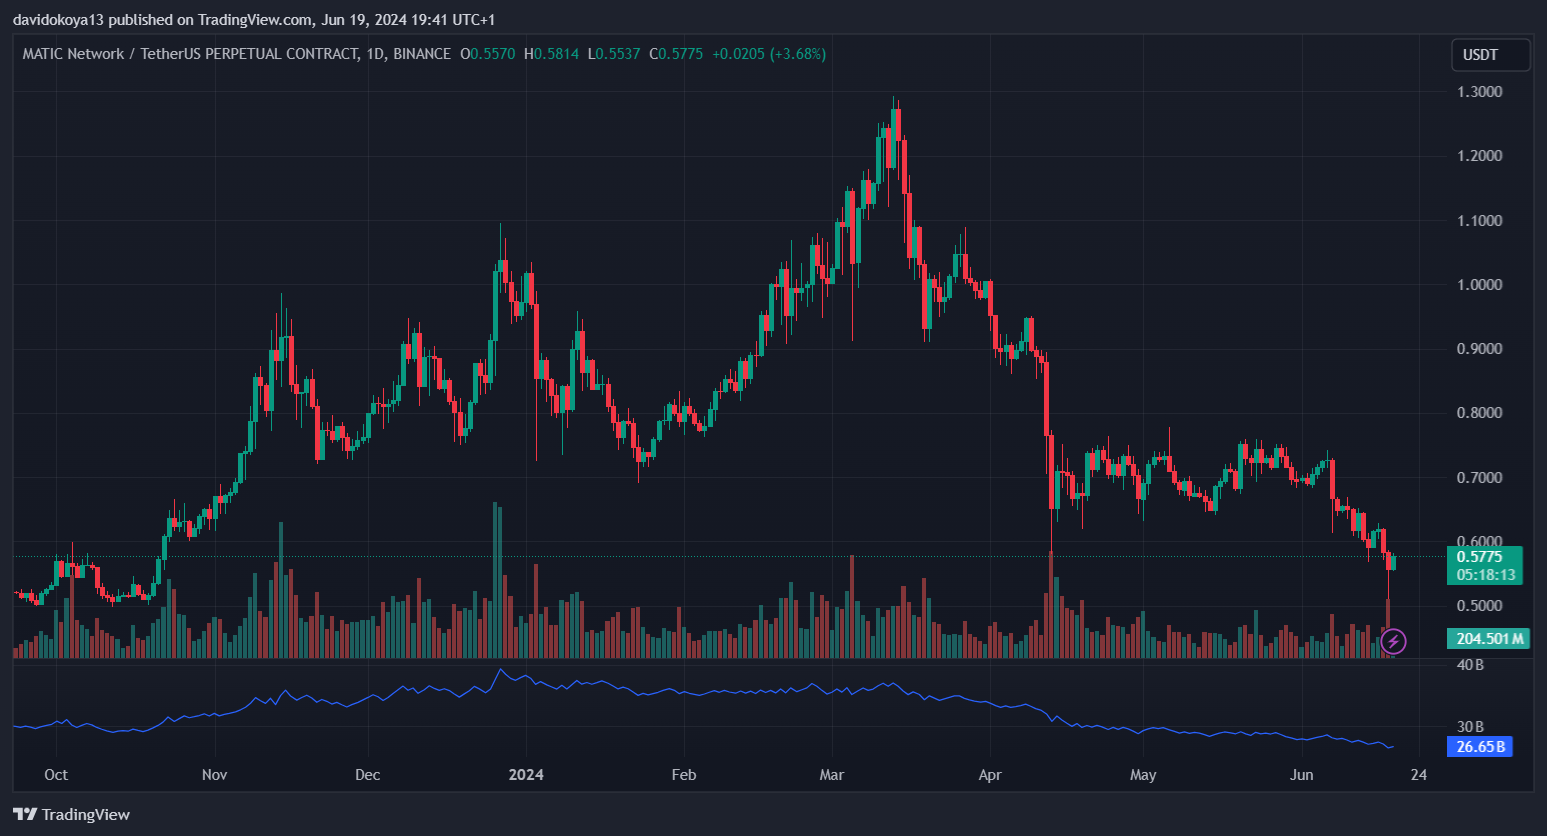 MATIC/USDT daily candle chart